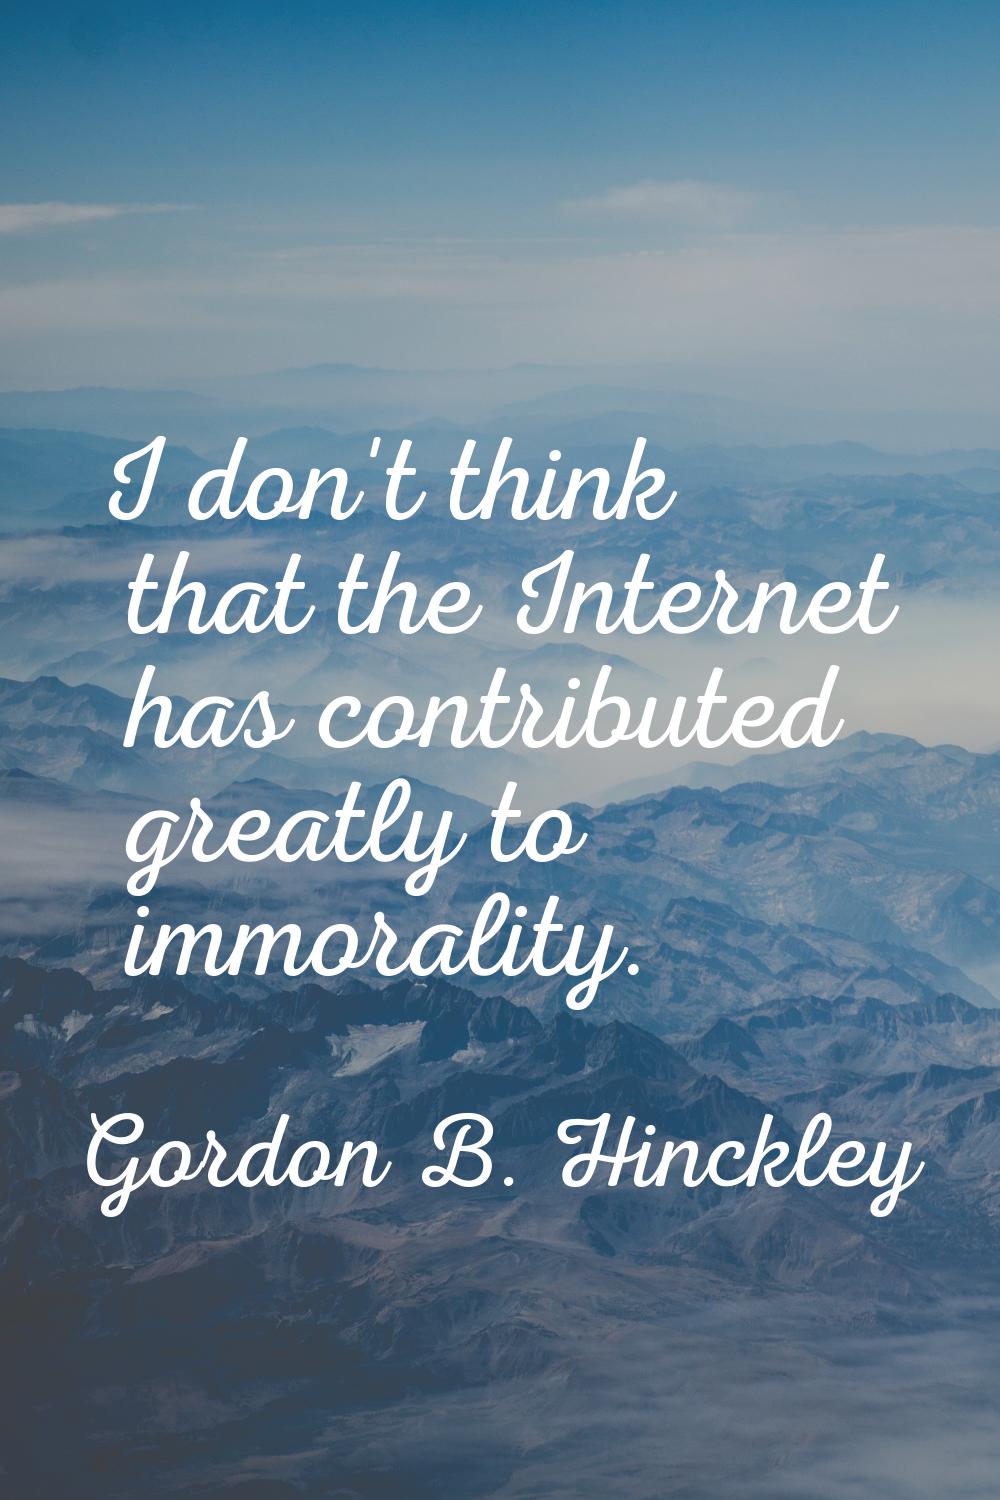 I don't think that the Internet has contributed greatly to immorality.